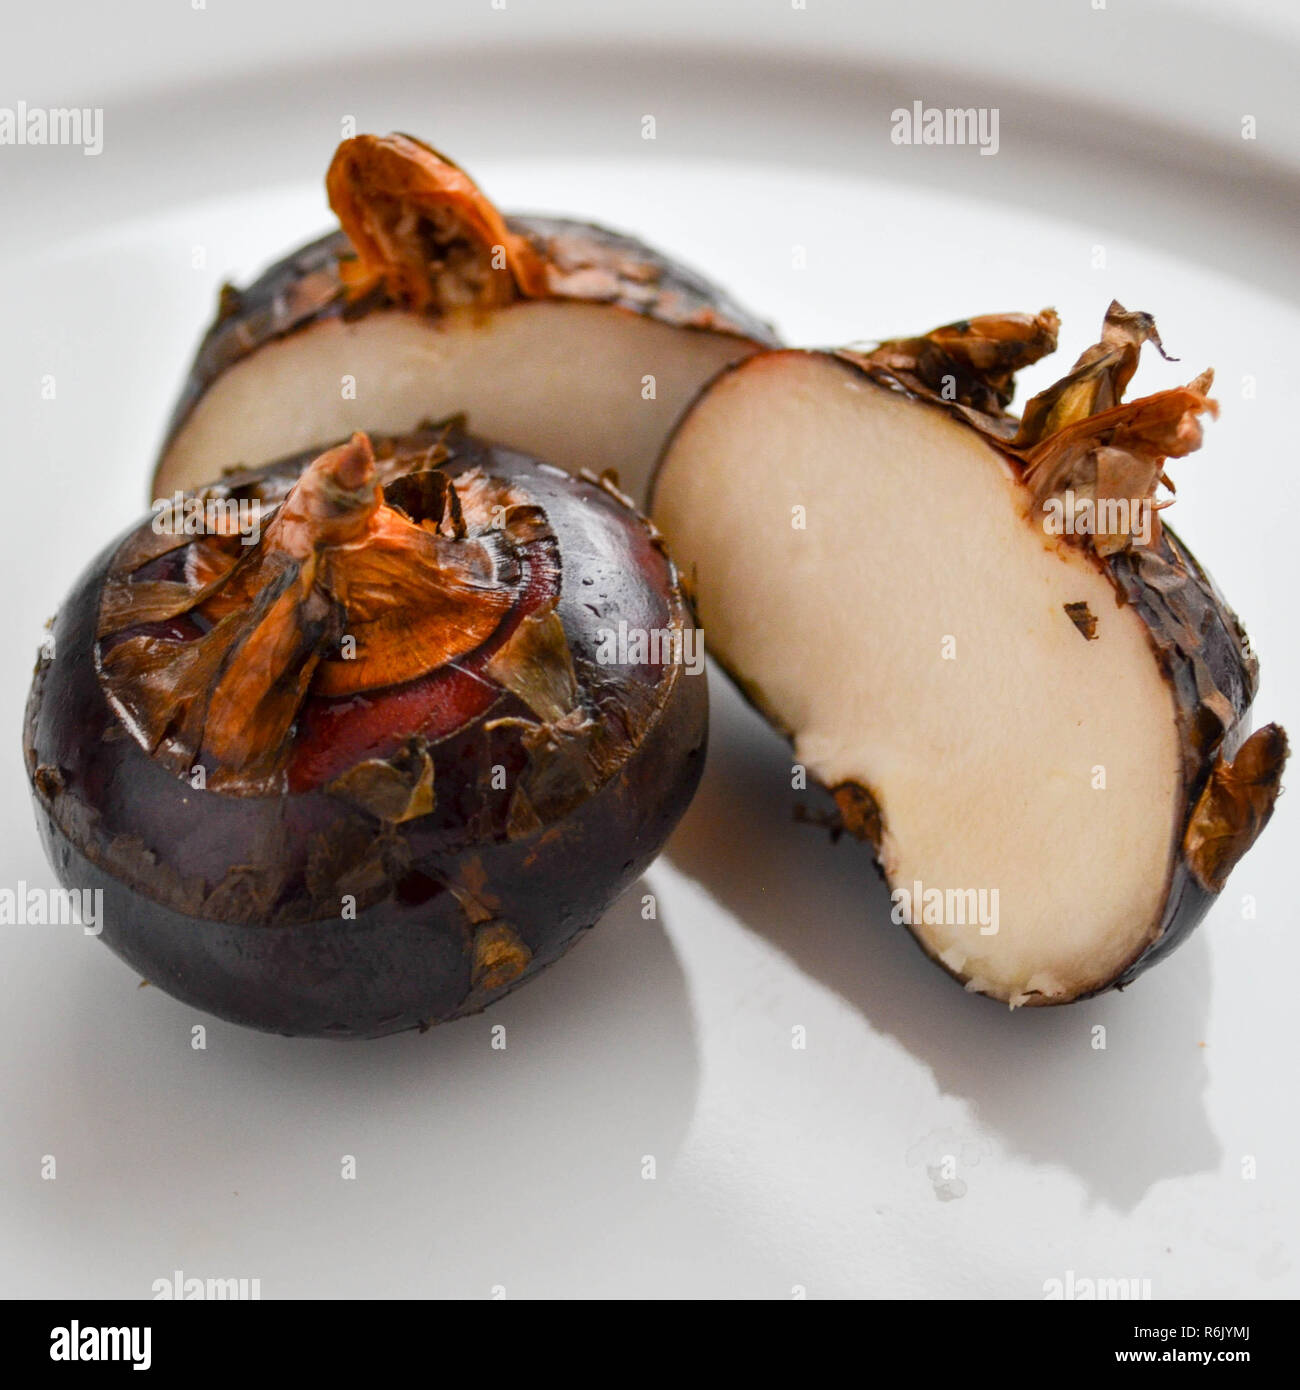 Fresh water chestnuts (Eleocharis dulcis) on a white plate, including a cross-section. Stock Photo